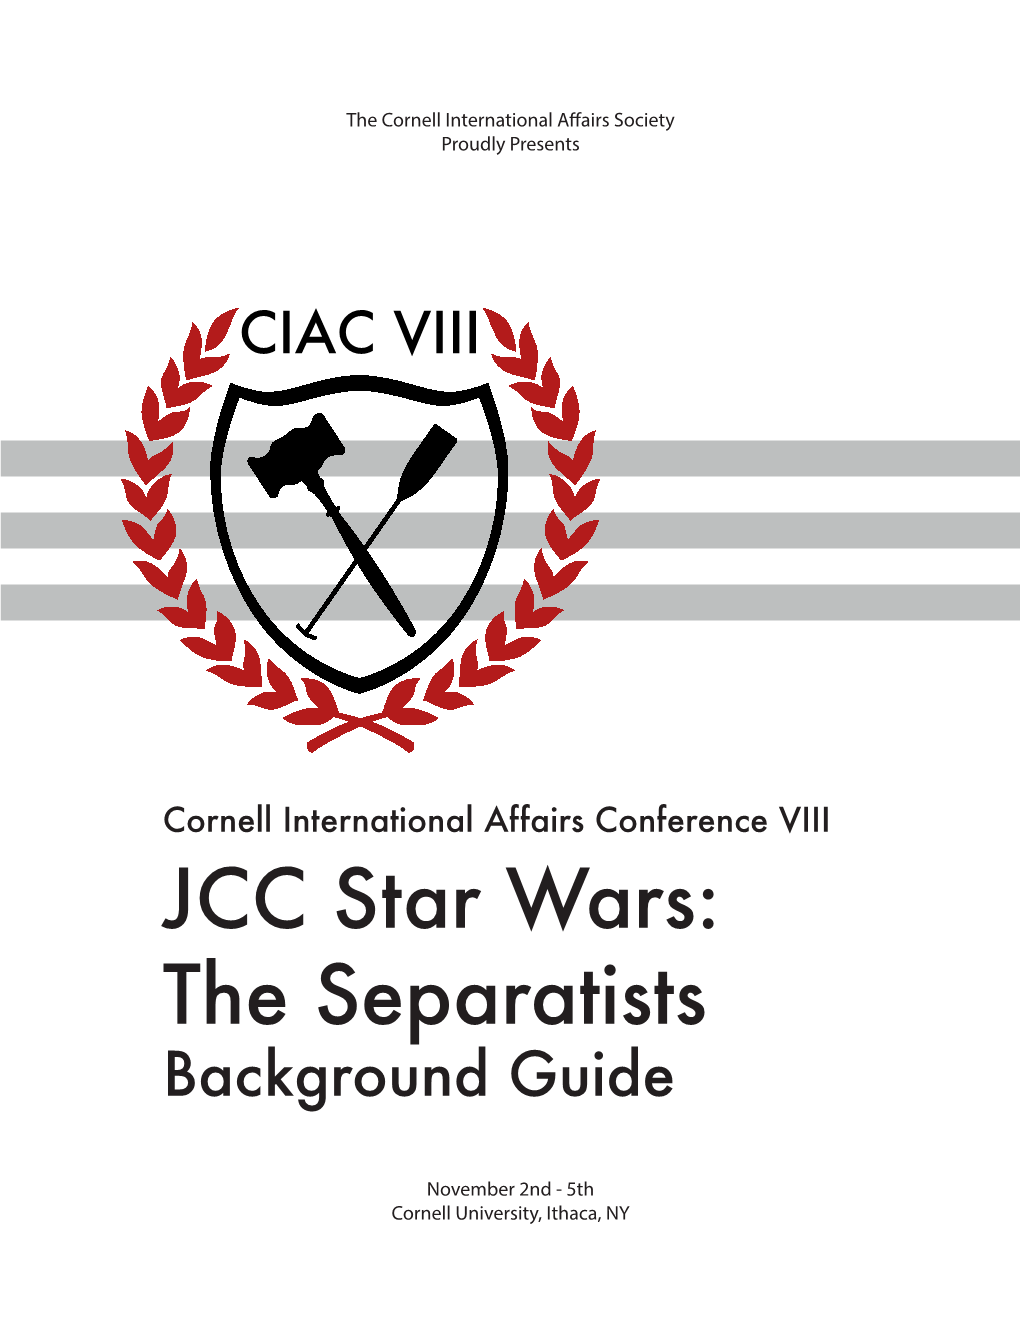 JCC Star Wars: the Separatists Background Guide